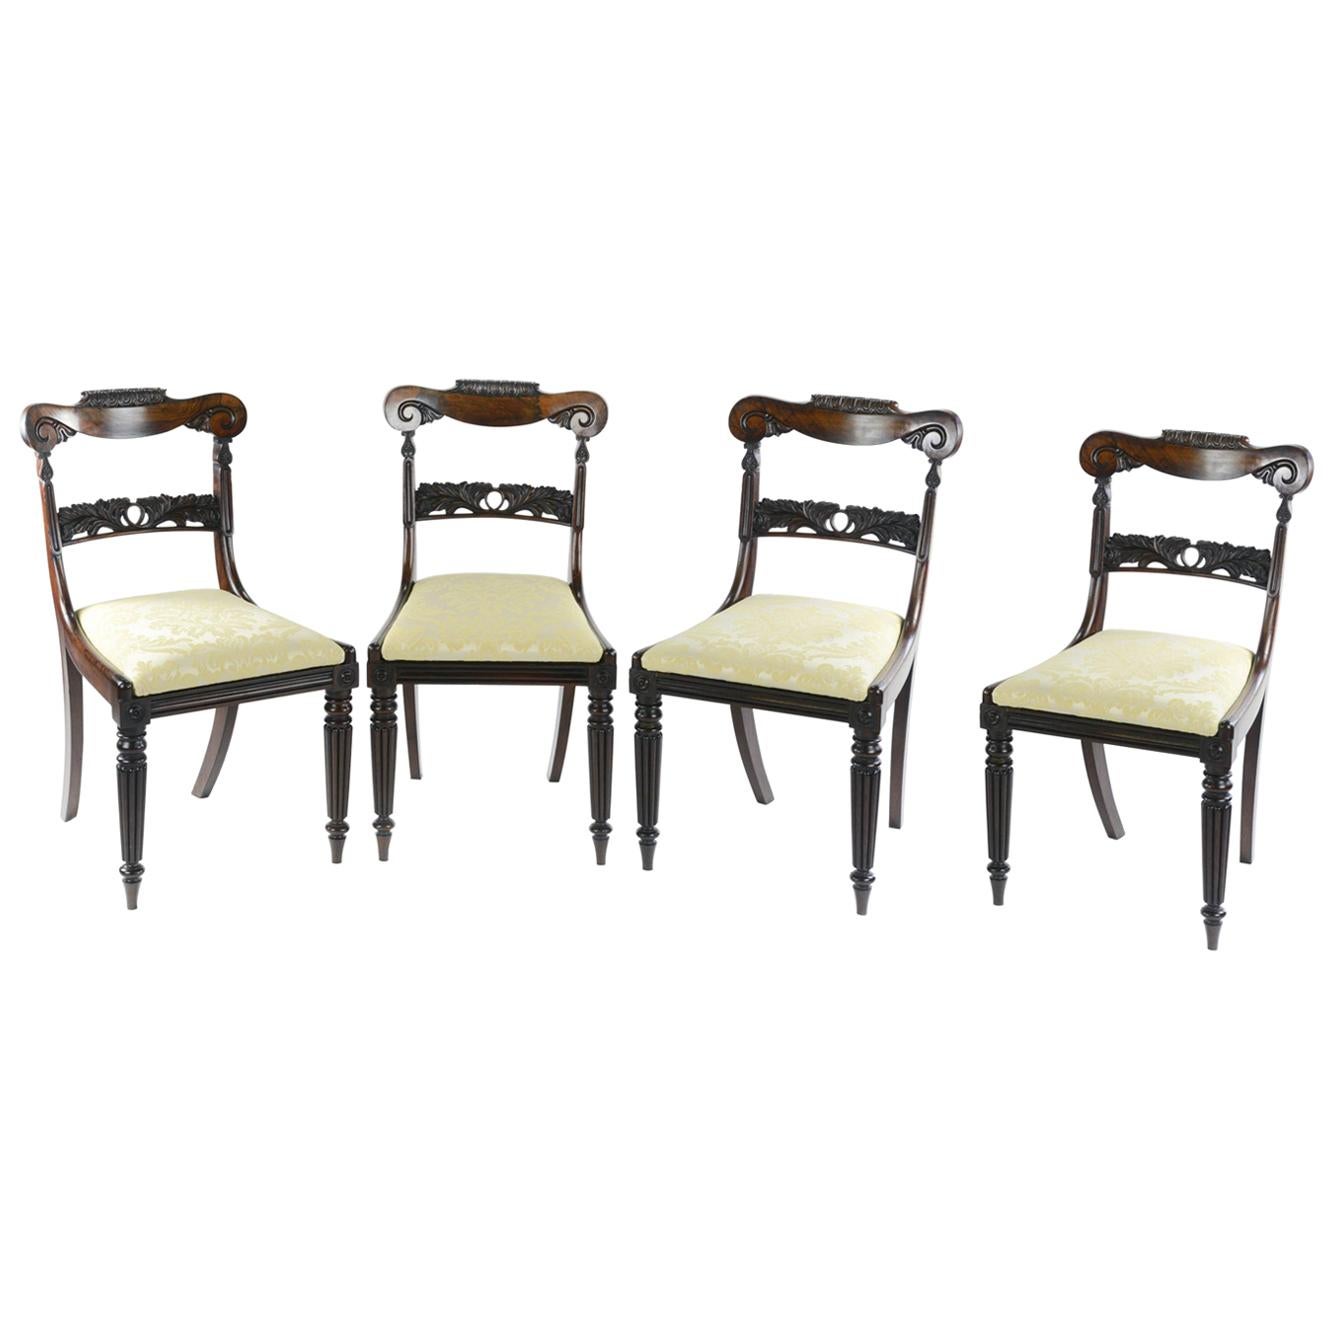 Set of Four William IV Rosewood Library Chairs Attributed to Gillows